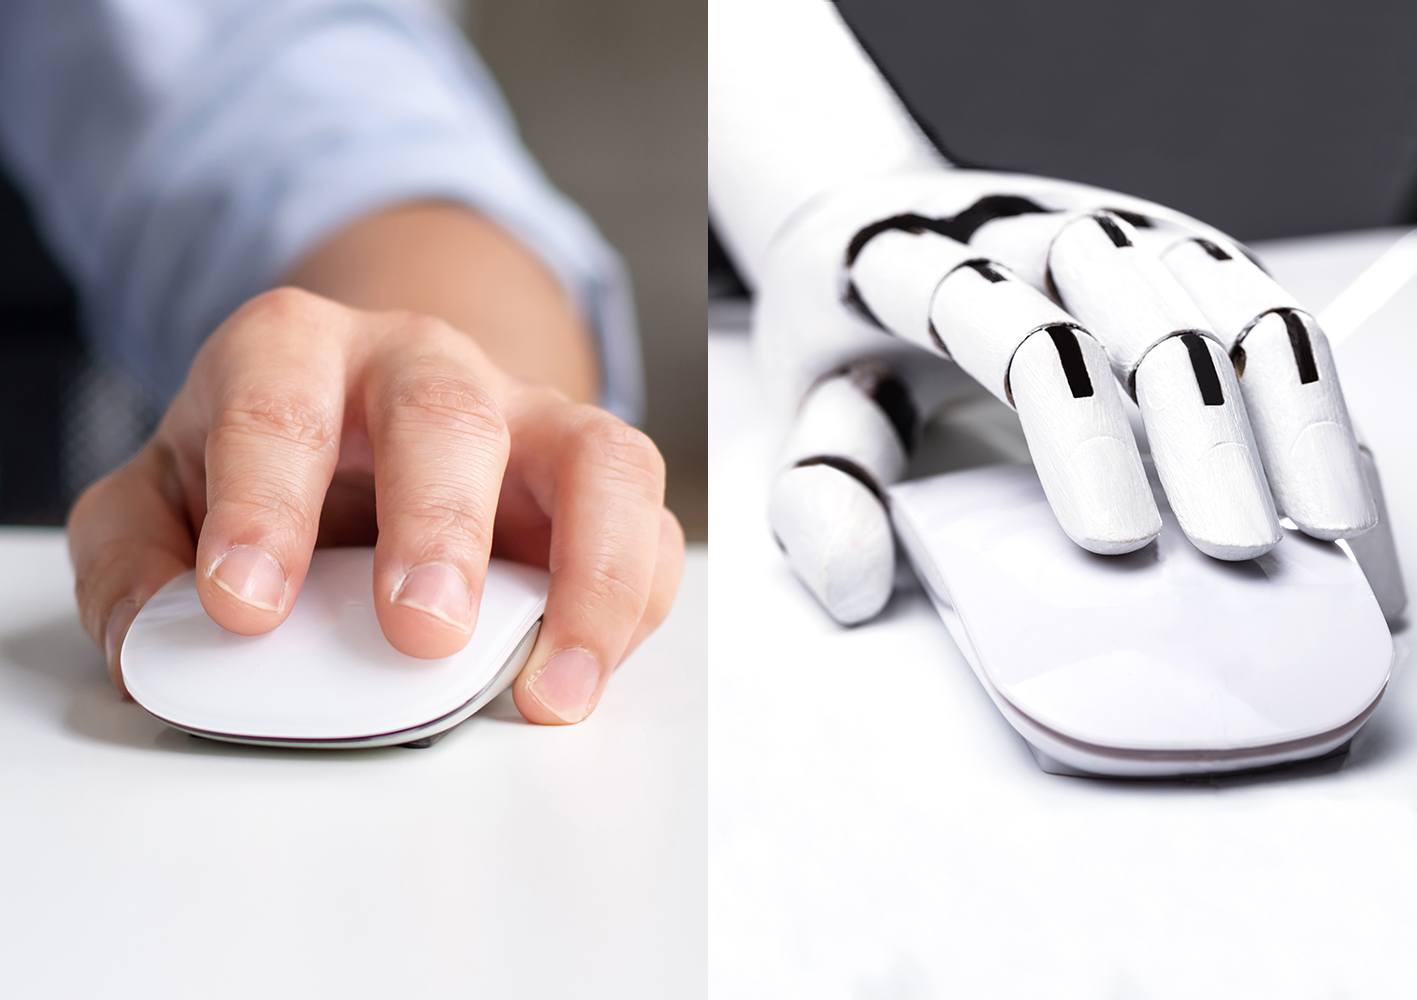 Human and robot hand holding computer mouse